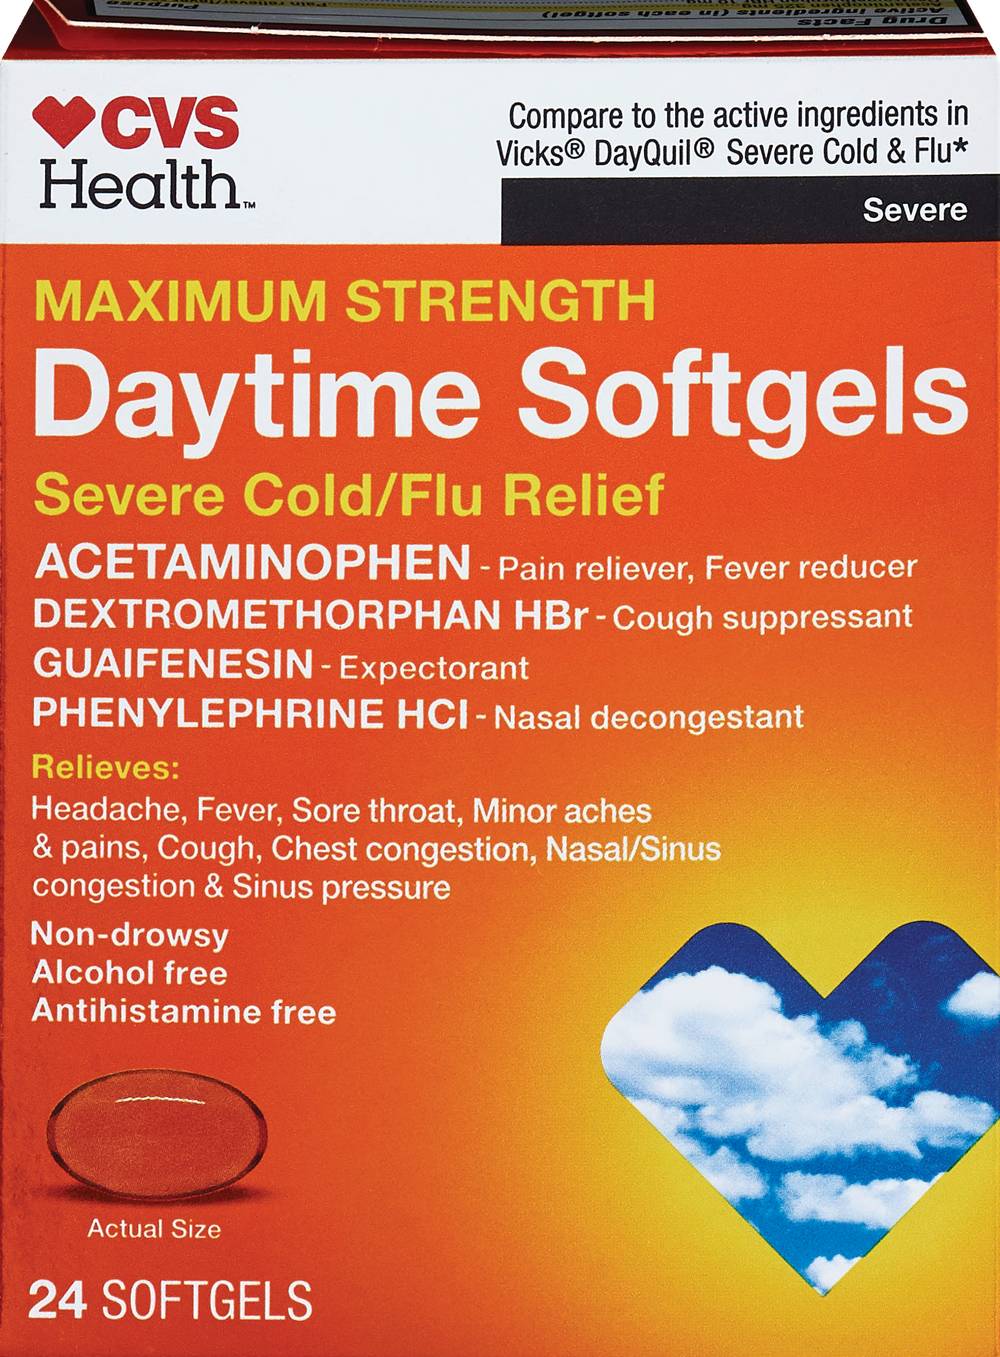 CVS Health Maximum Strength Daytime Softgels for Severe Cold + Flu Relief, 24 CT